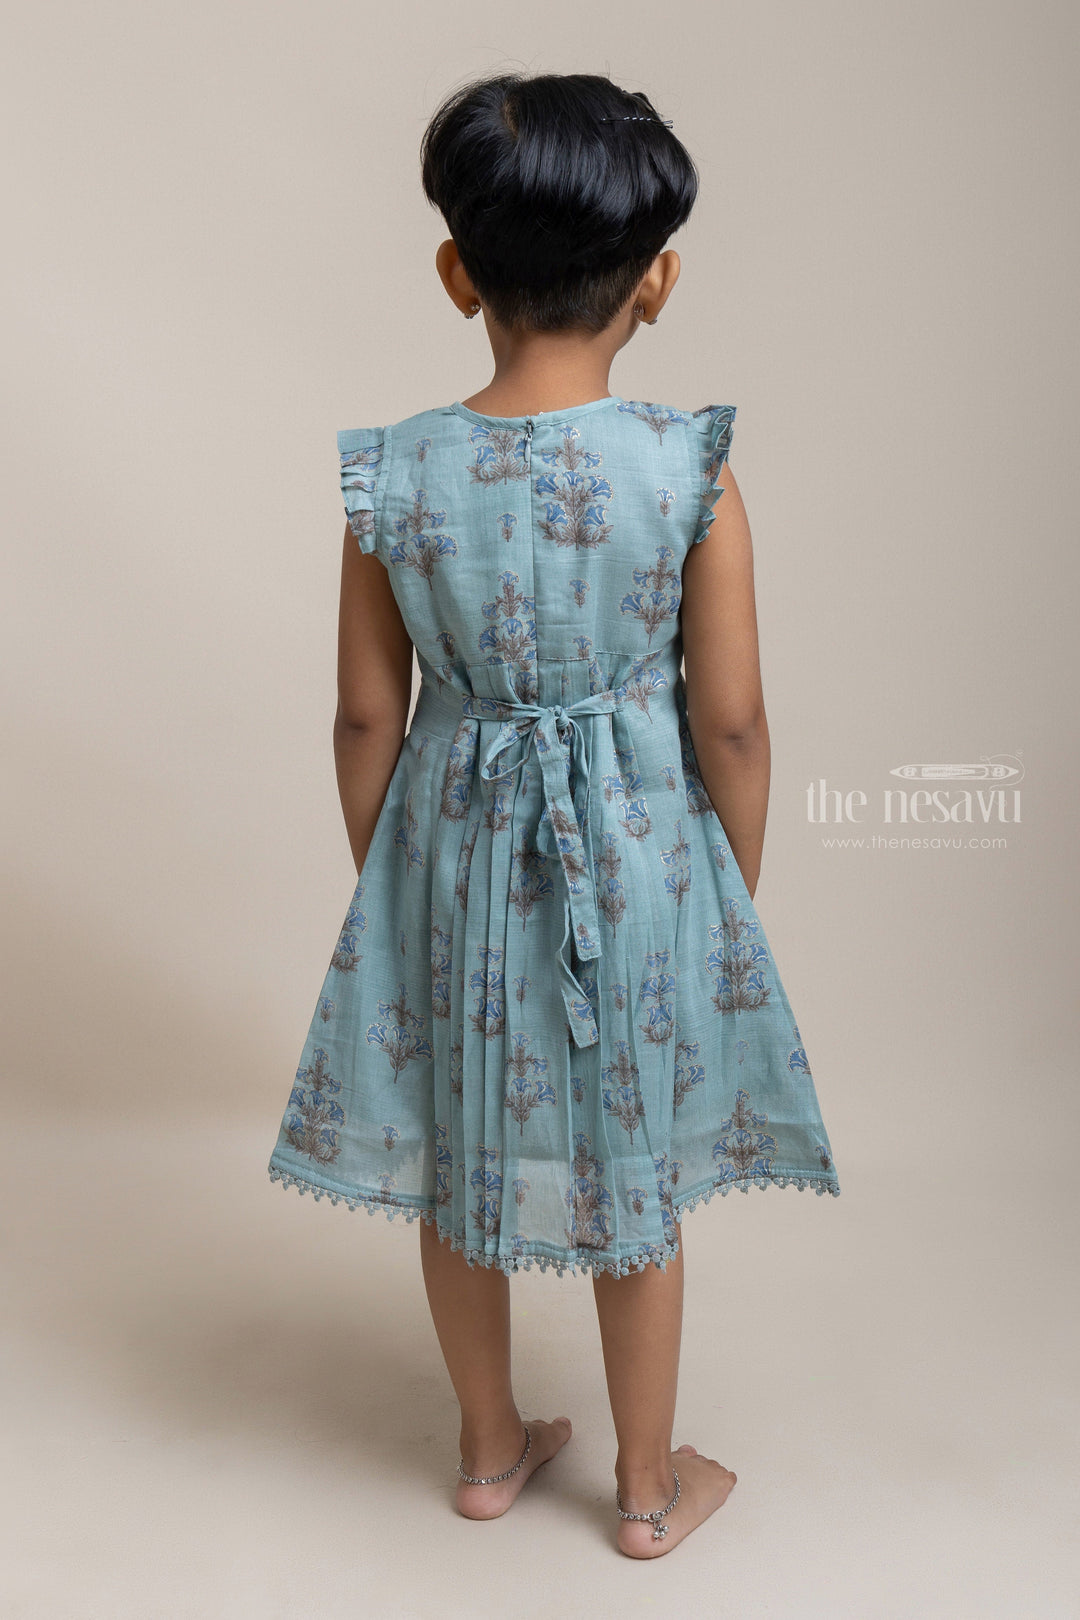 The Nesavu Girls Cotton Frock Pretty Green Floral Embroidered Yoke And Floral Printed Cotton Frock for Girls Nesavu Fancy Green Cotton Frock for Girls | Embroidered Frock For Girls | The Nesavu